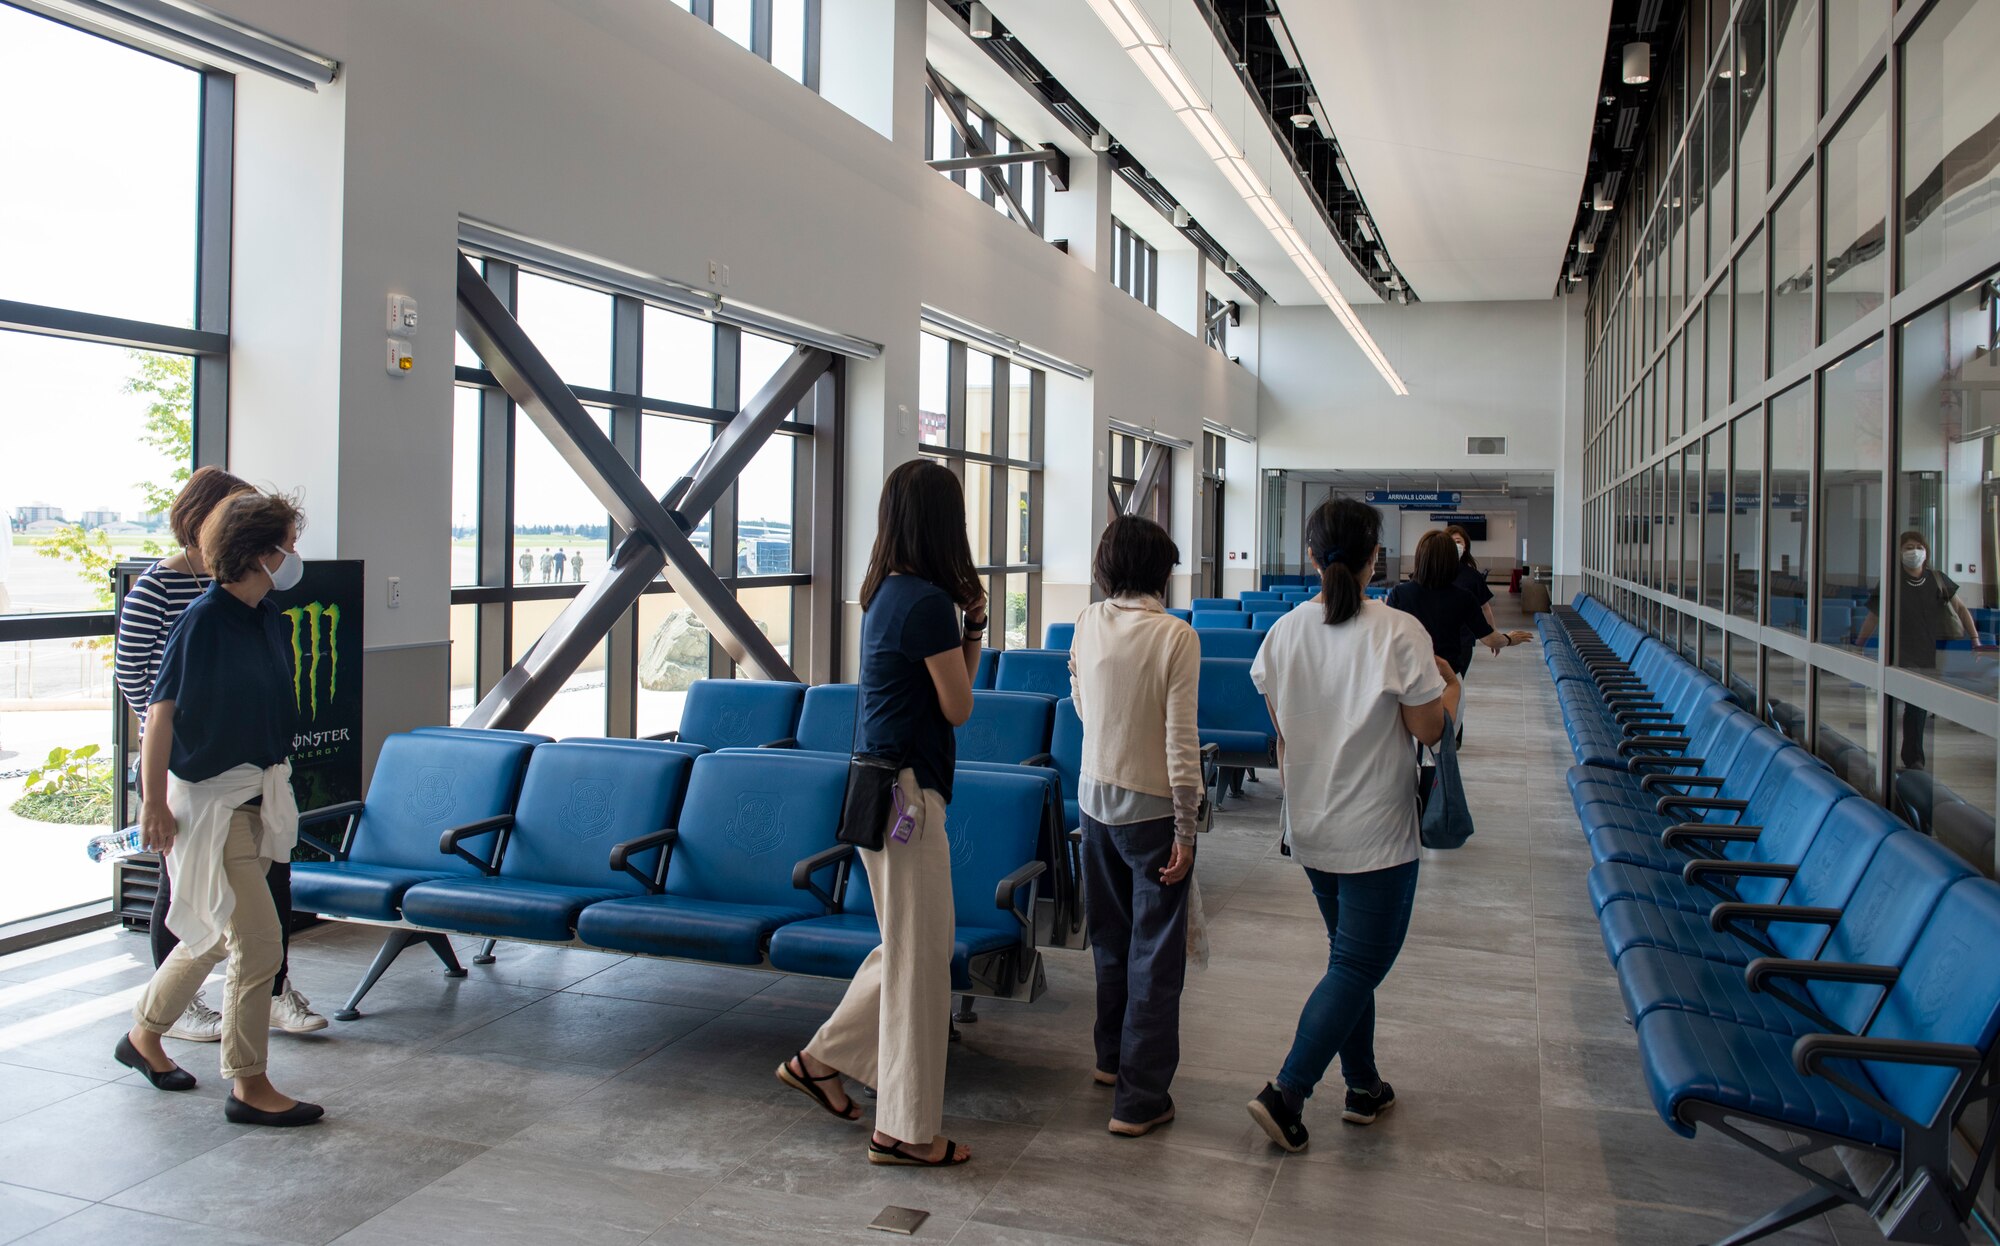 Attendees explore the Yokota Passenger Terminal after a ribbon cutting ceremony, June 13, 2022, at Yokota Air Base, Japan. The project spanned nearly seven years, with planning starting in late 2015, construction starting in June of 2020 and completion in June of 2022.